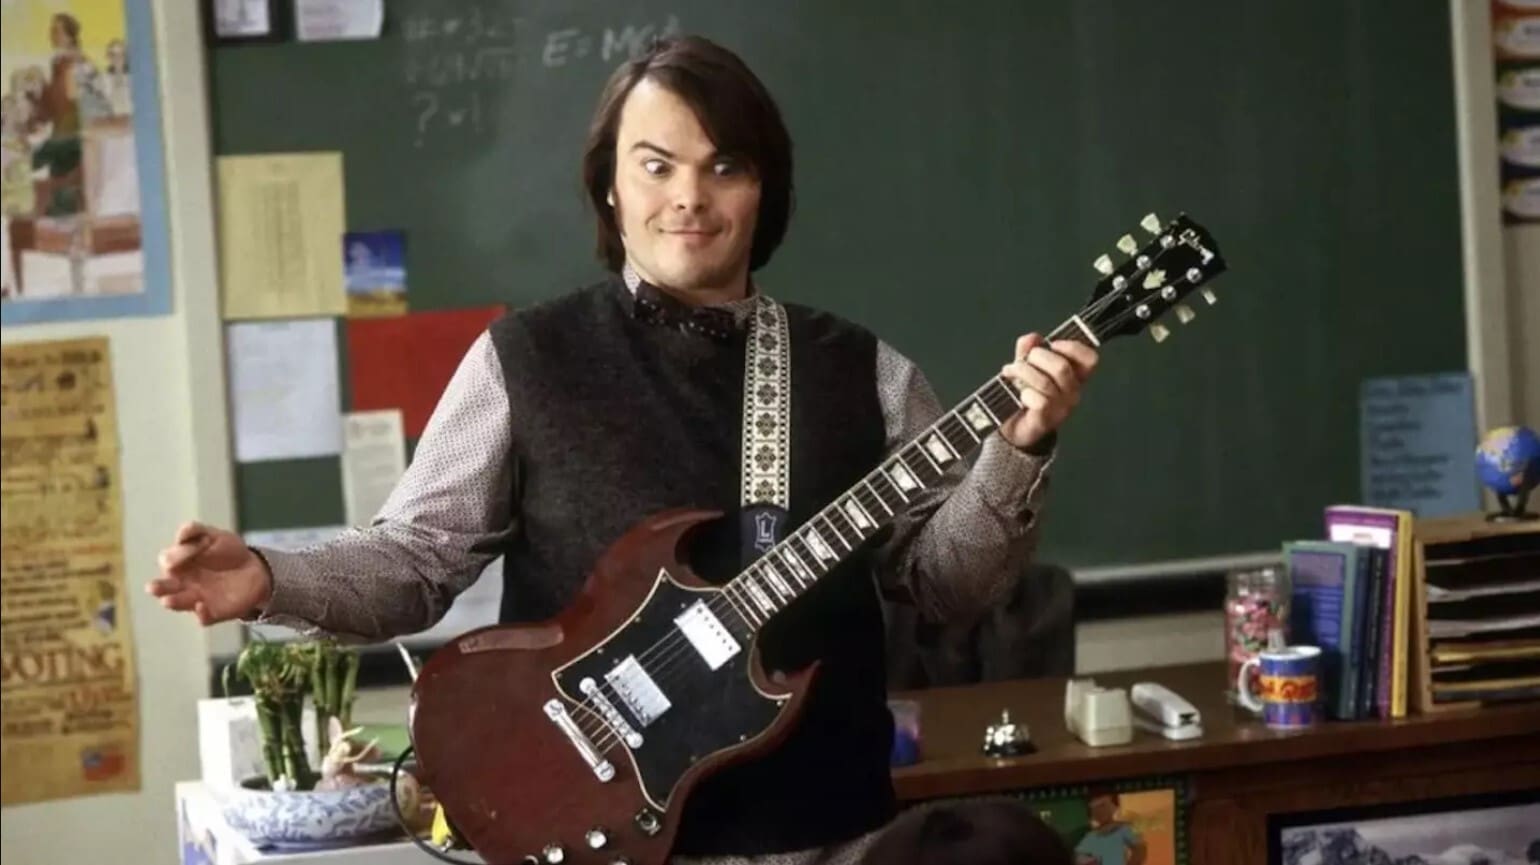 Jack Black and Director of ‘School of Rock’ Confirm They’re Up For Sequel Under One Condition